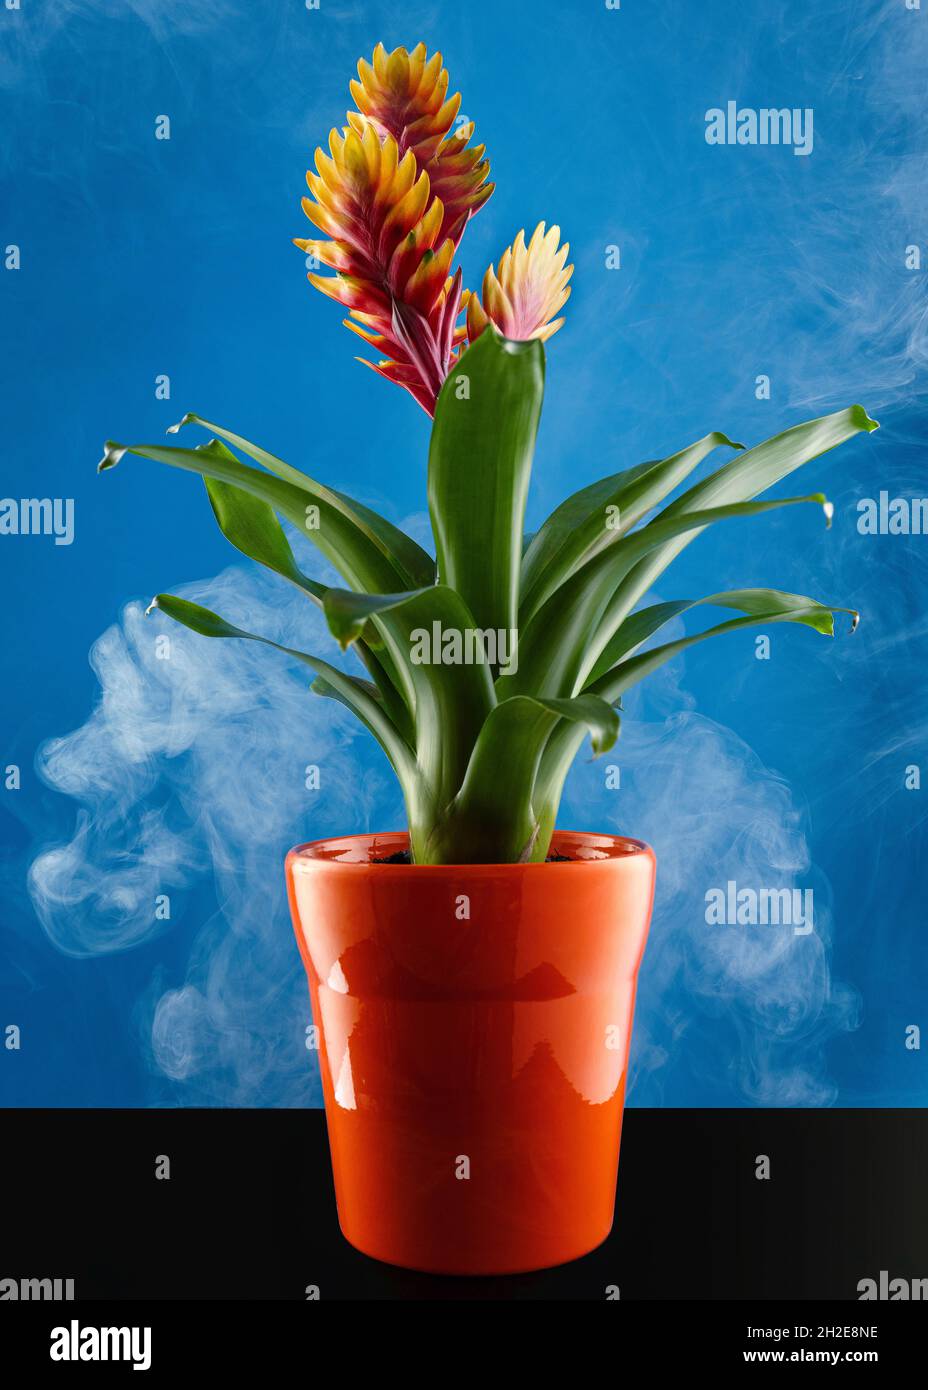 Potted Vriesea Bromelia Standard flower in full bloom shot against a beautiful blue background with smoke floating around. Studio shot Stock Photo